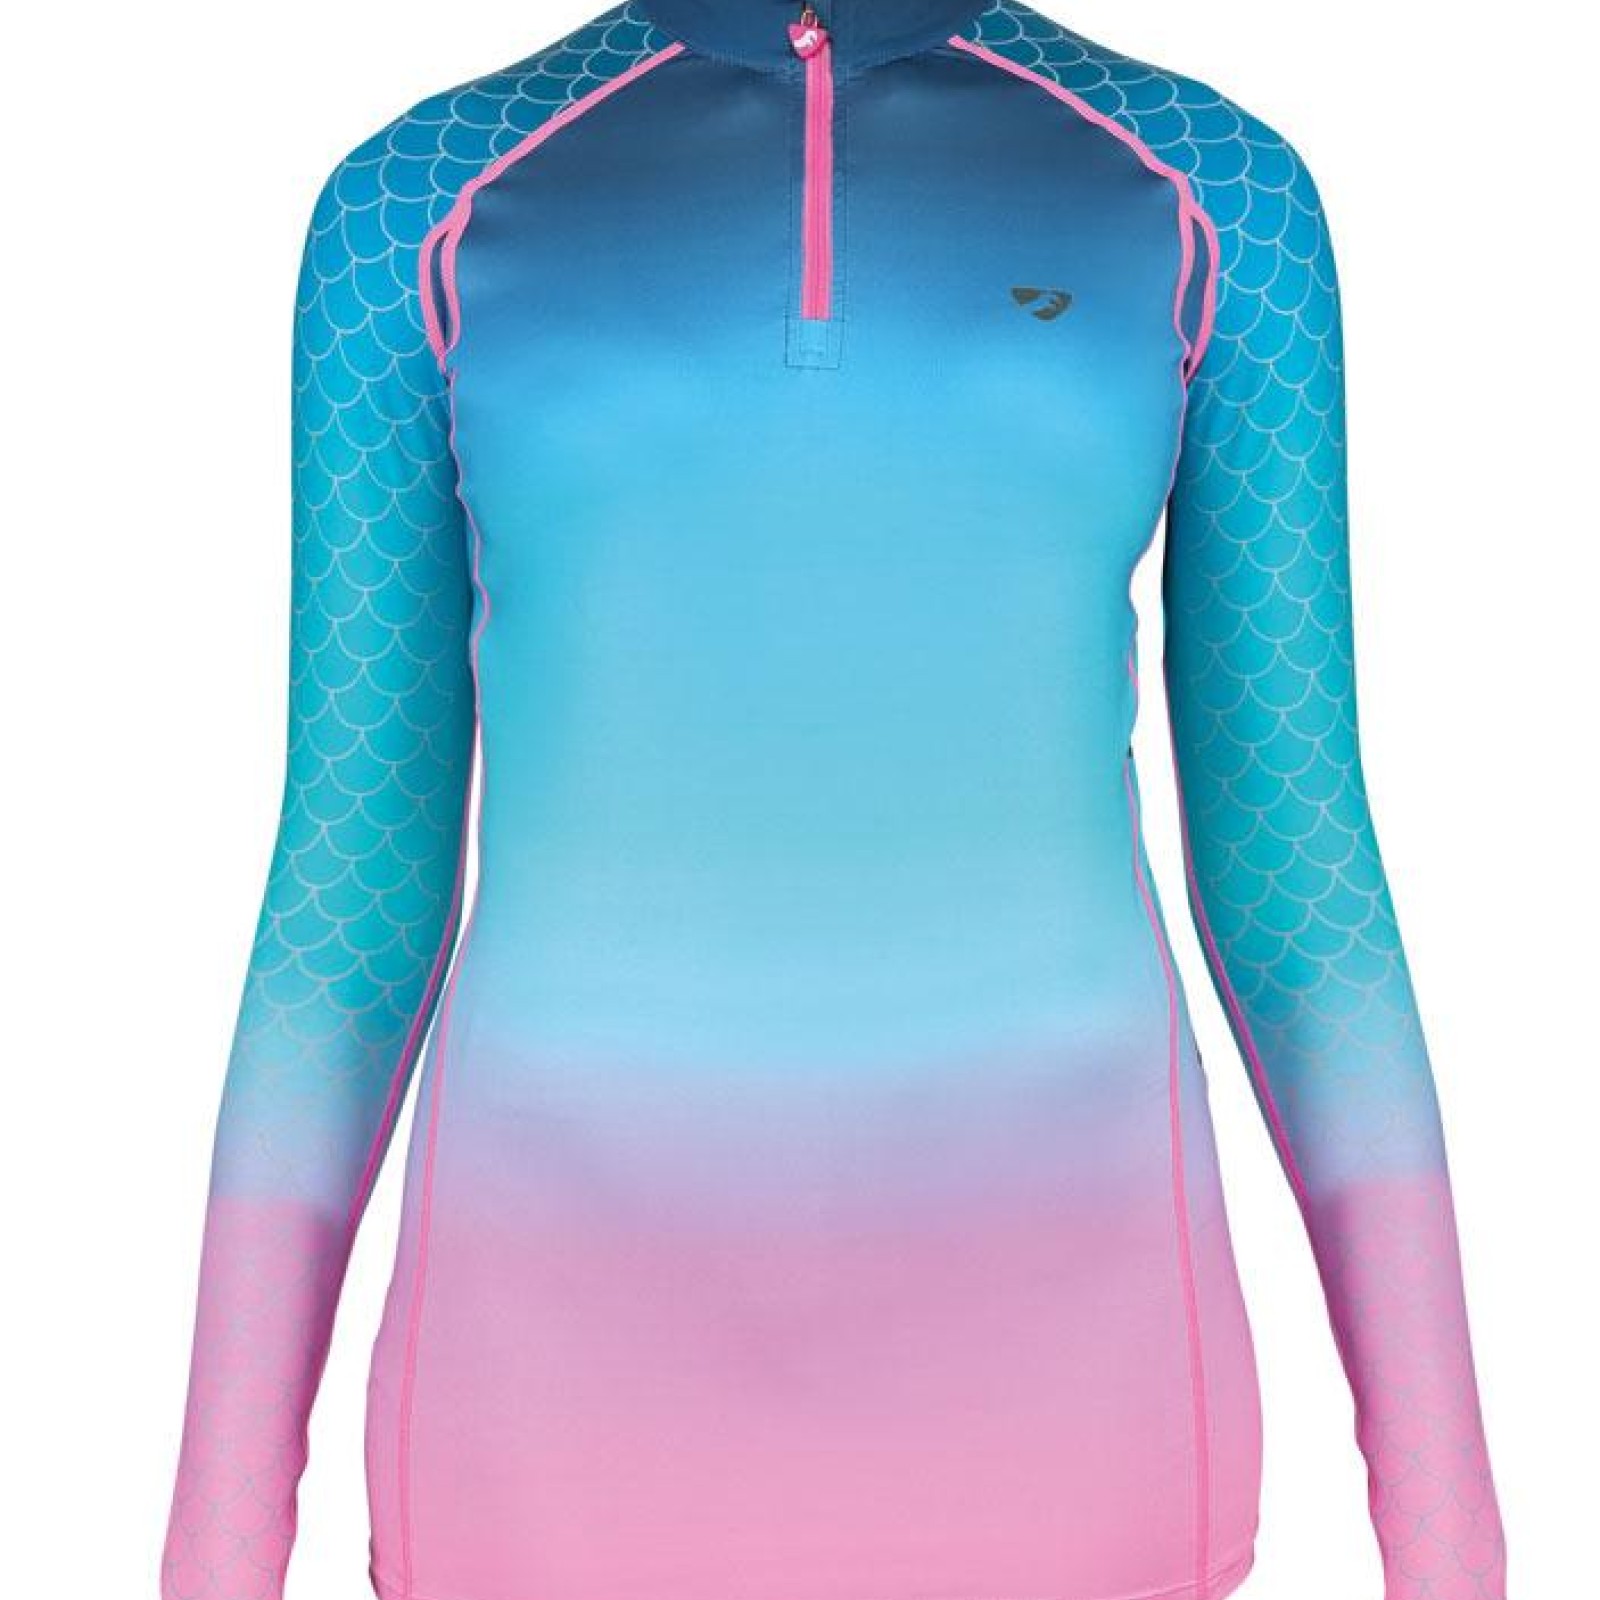 Shires Aubrion Mermaid Hyde Shirt Base Layer Top 